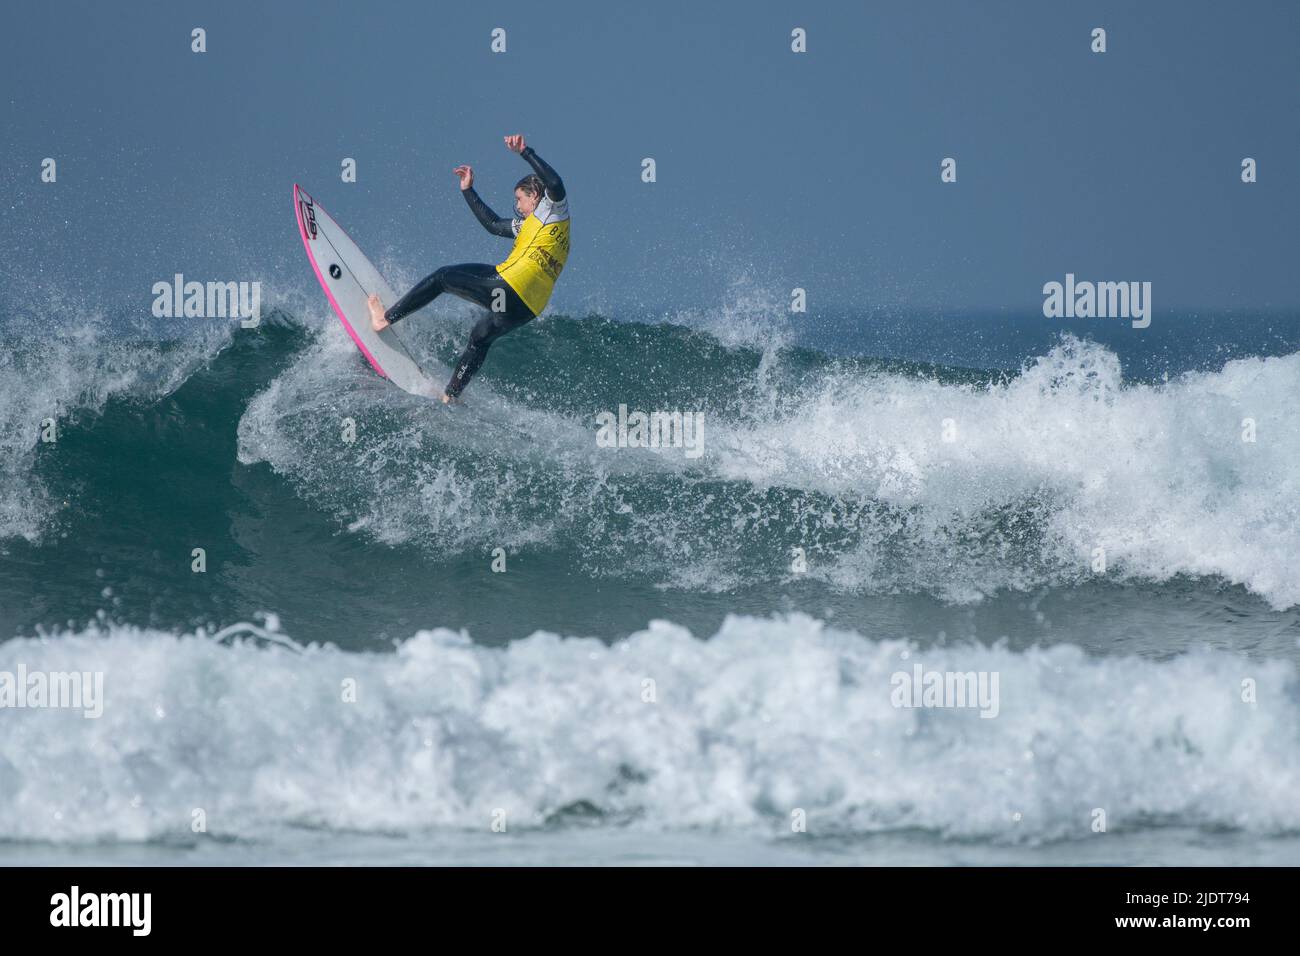 A Male surfer competing in a surfing competition at Fistral in Newquay in Cornwall in the UK. Stock Photo